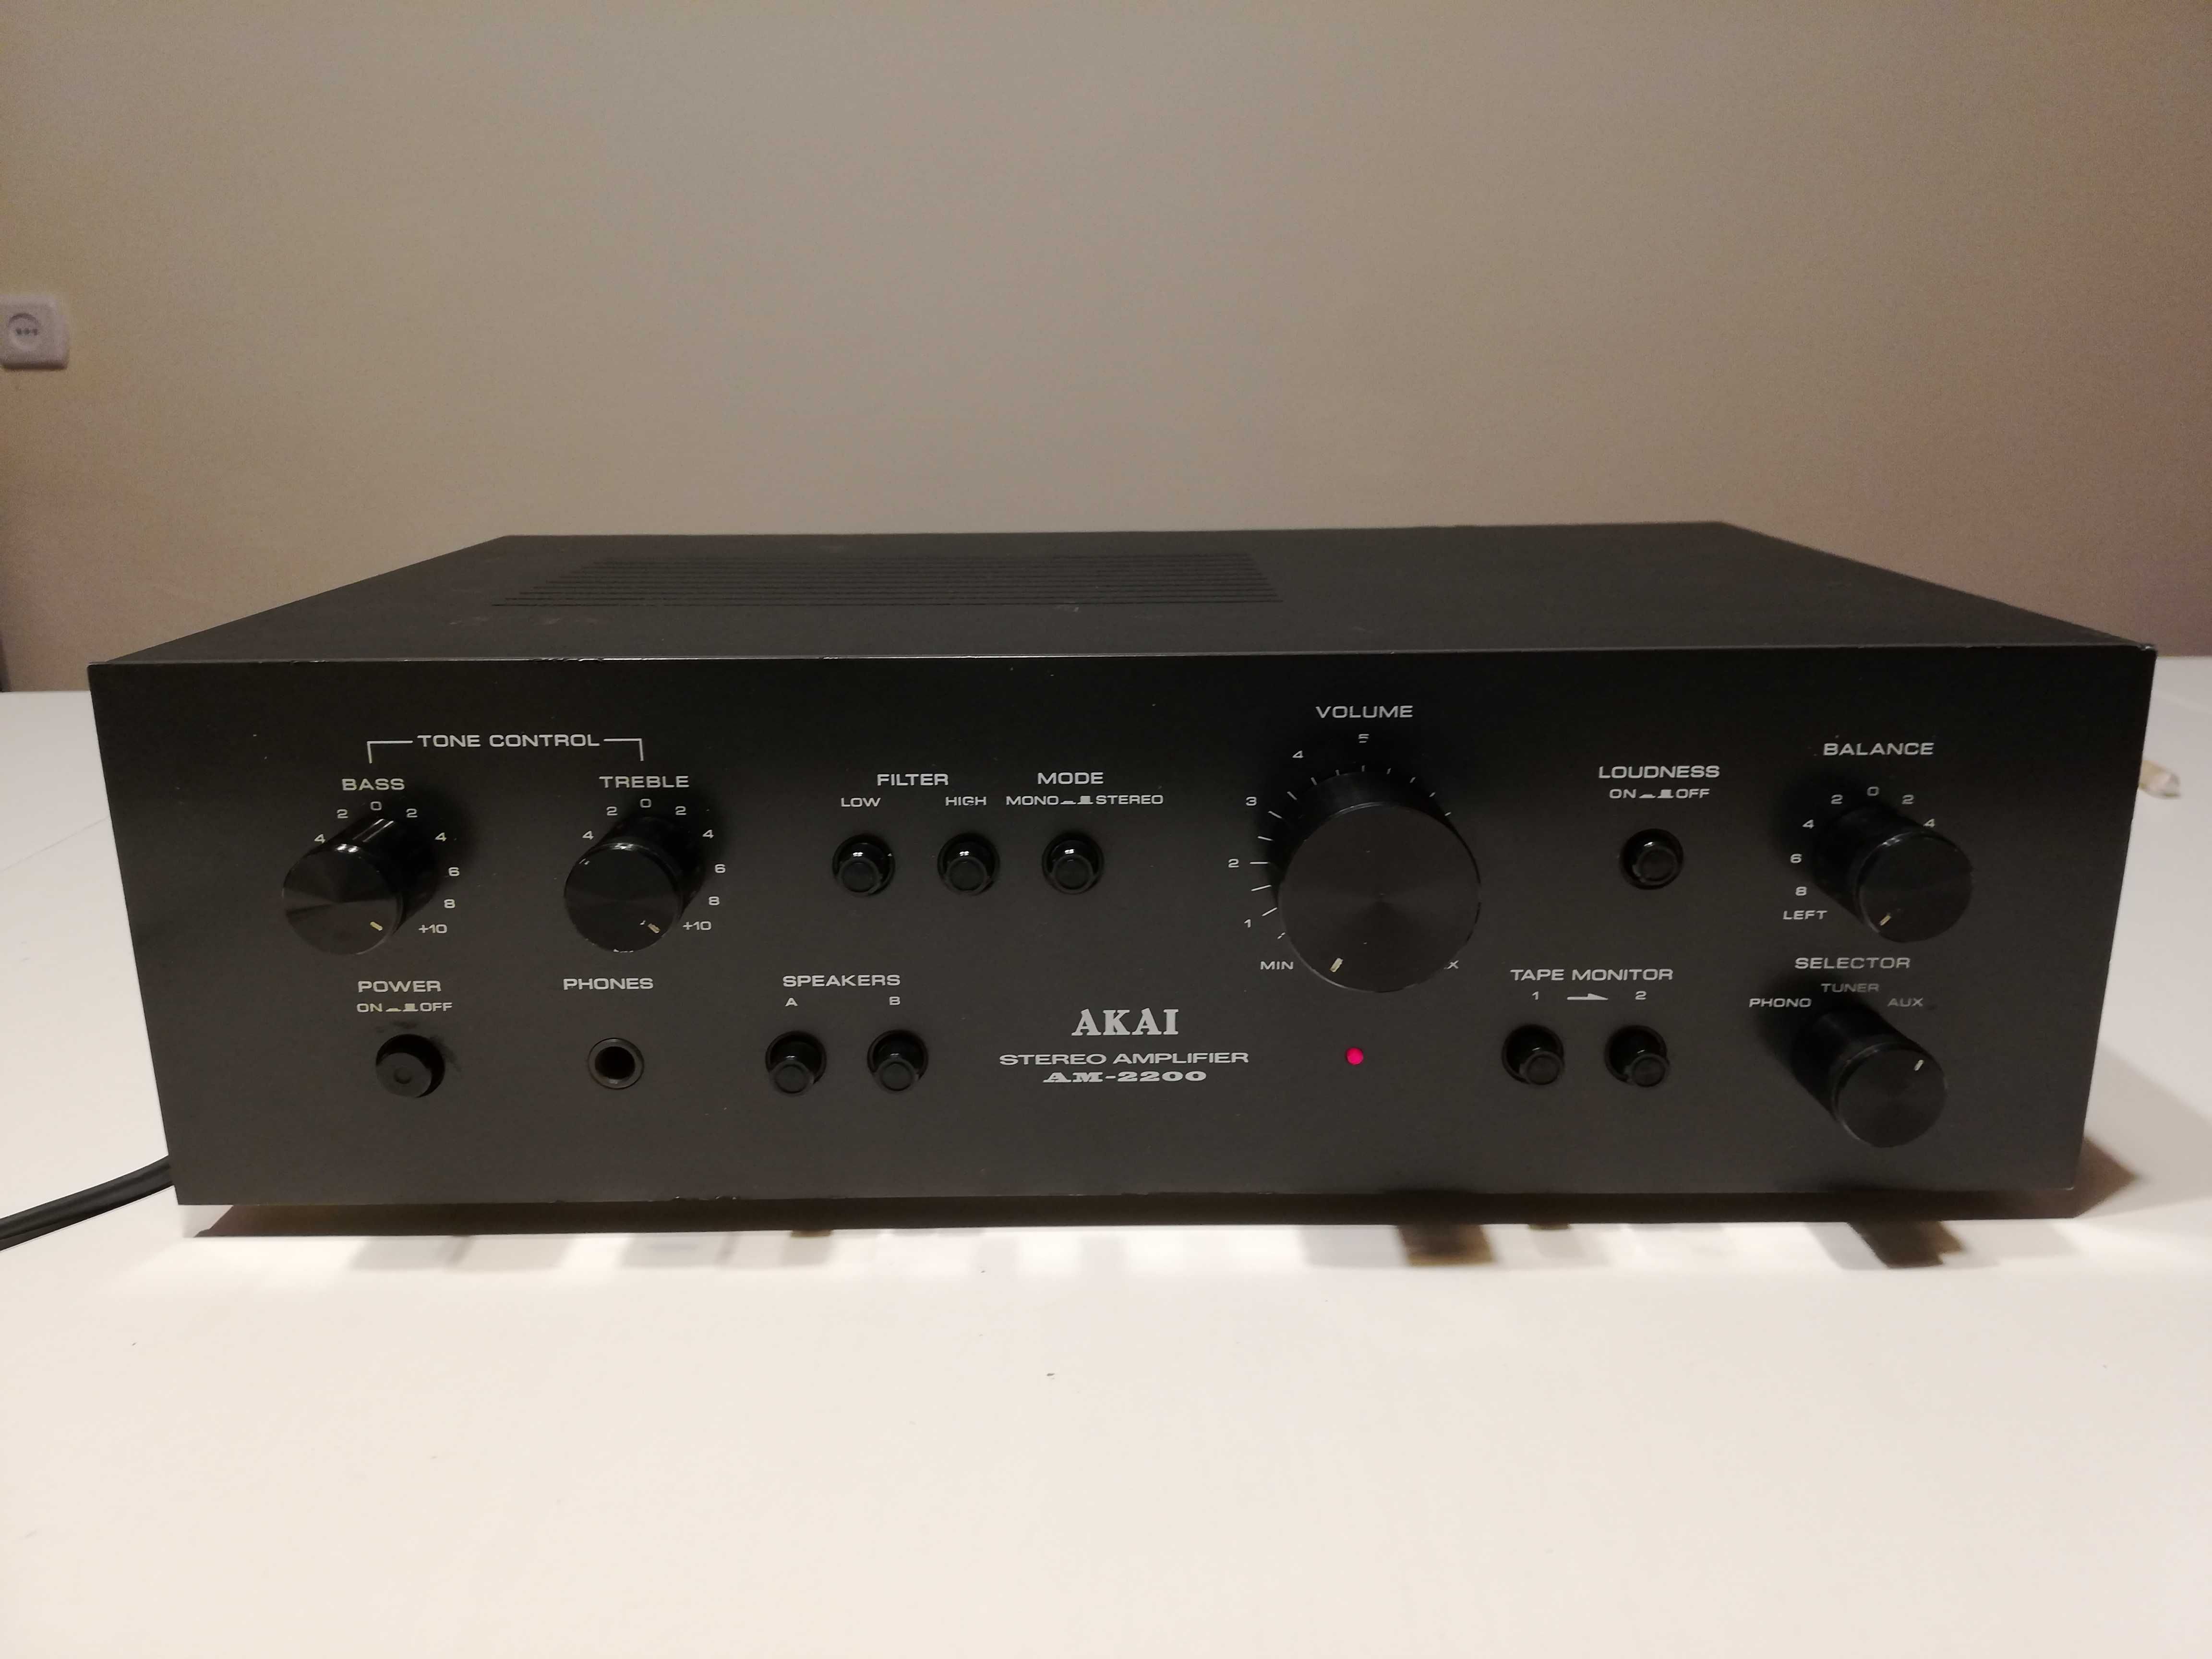 Amplificator Stereo AKAI model AM2200 -Vintage/made in Japan/Impecabil